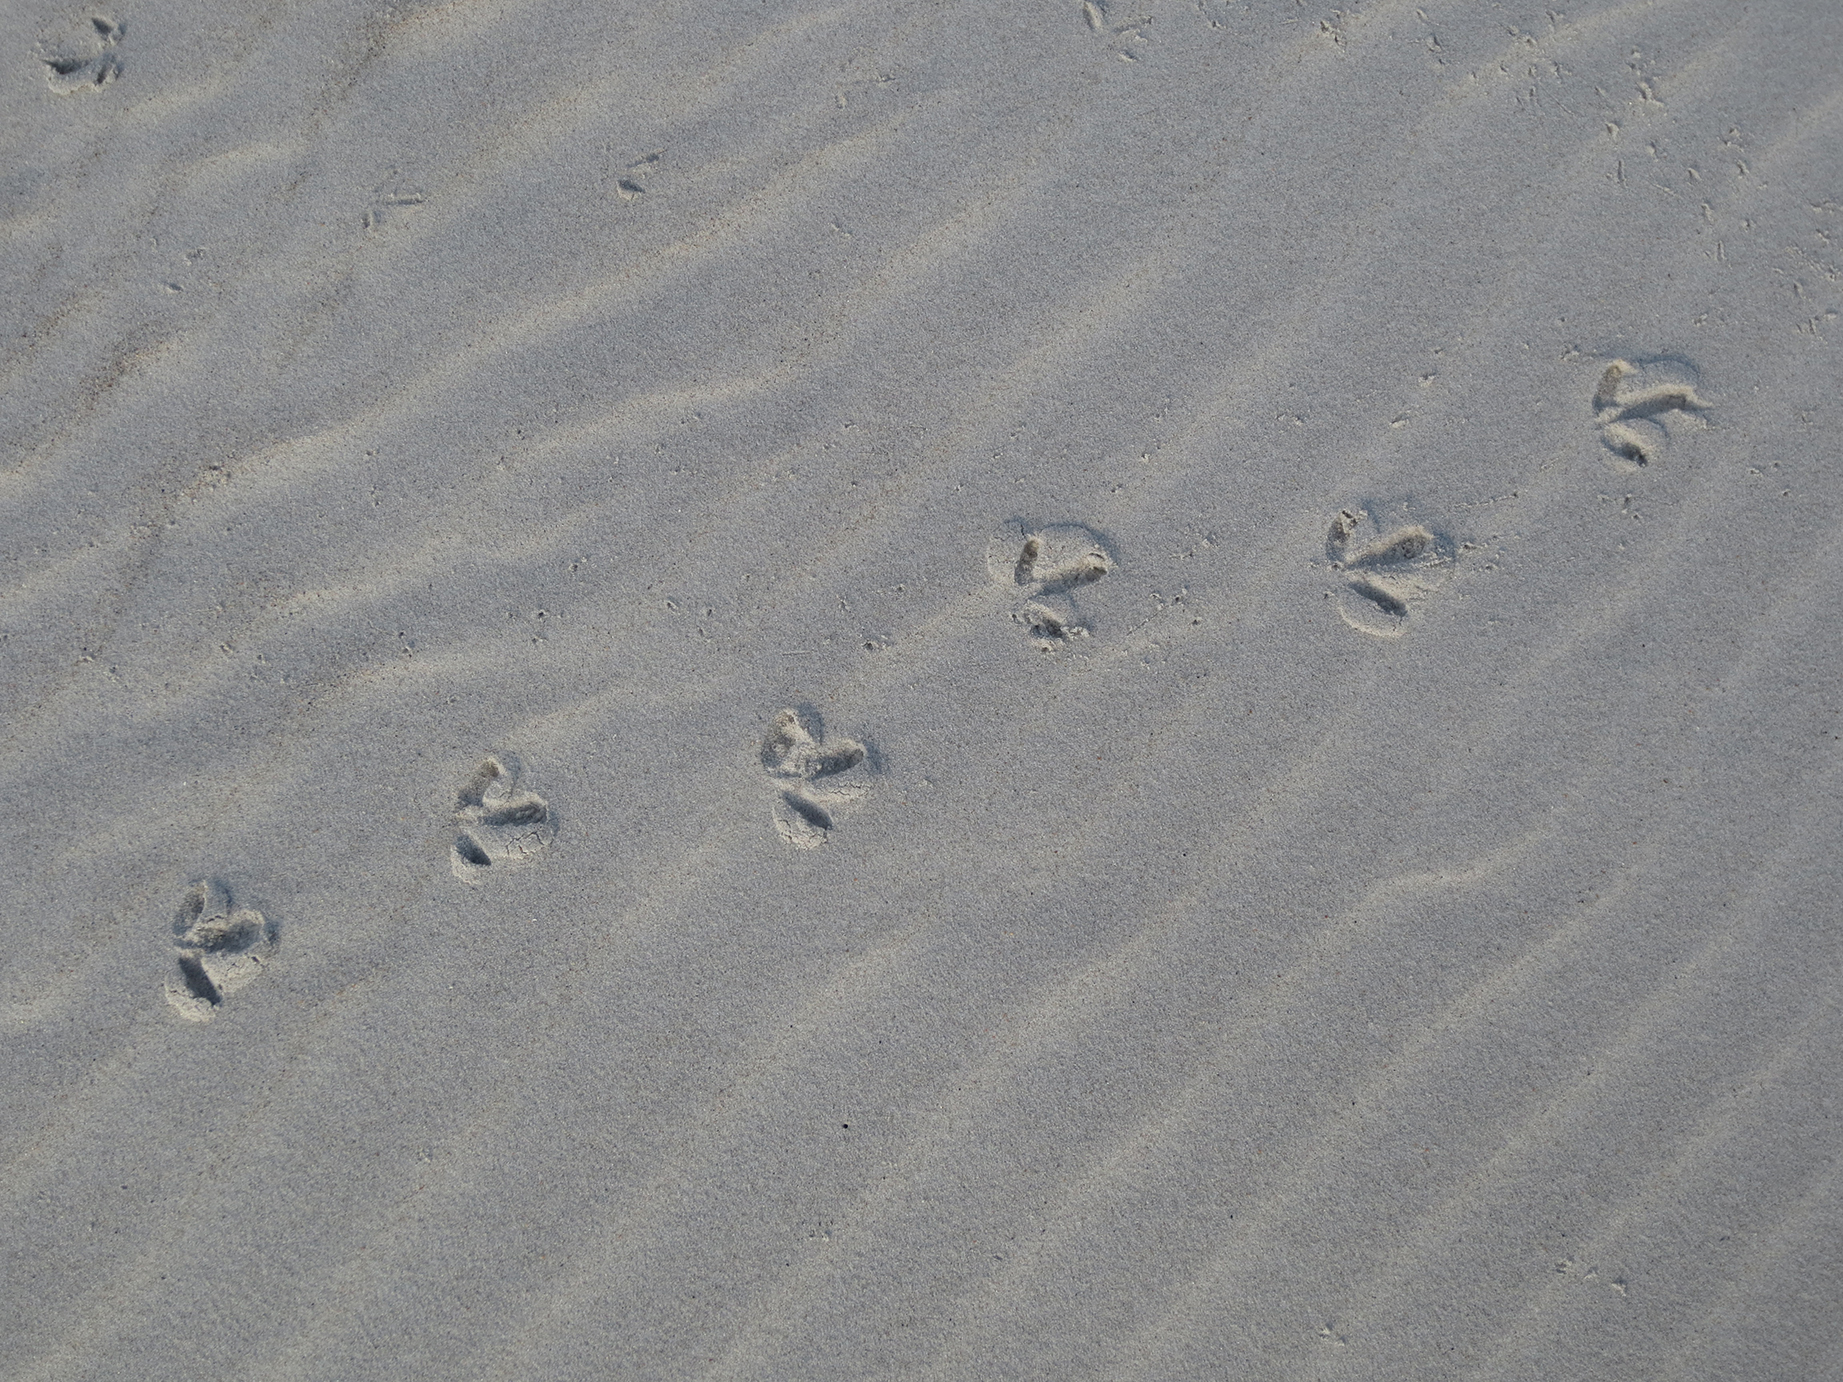 American Oystercatcher tracks in the sand.